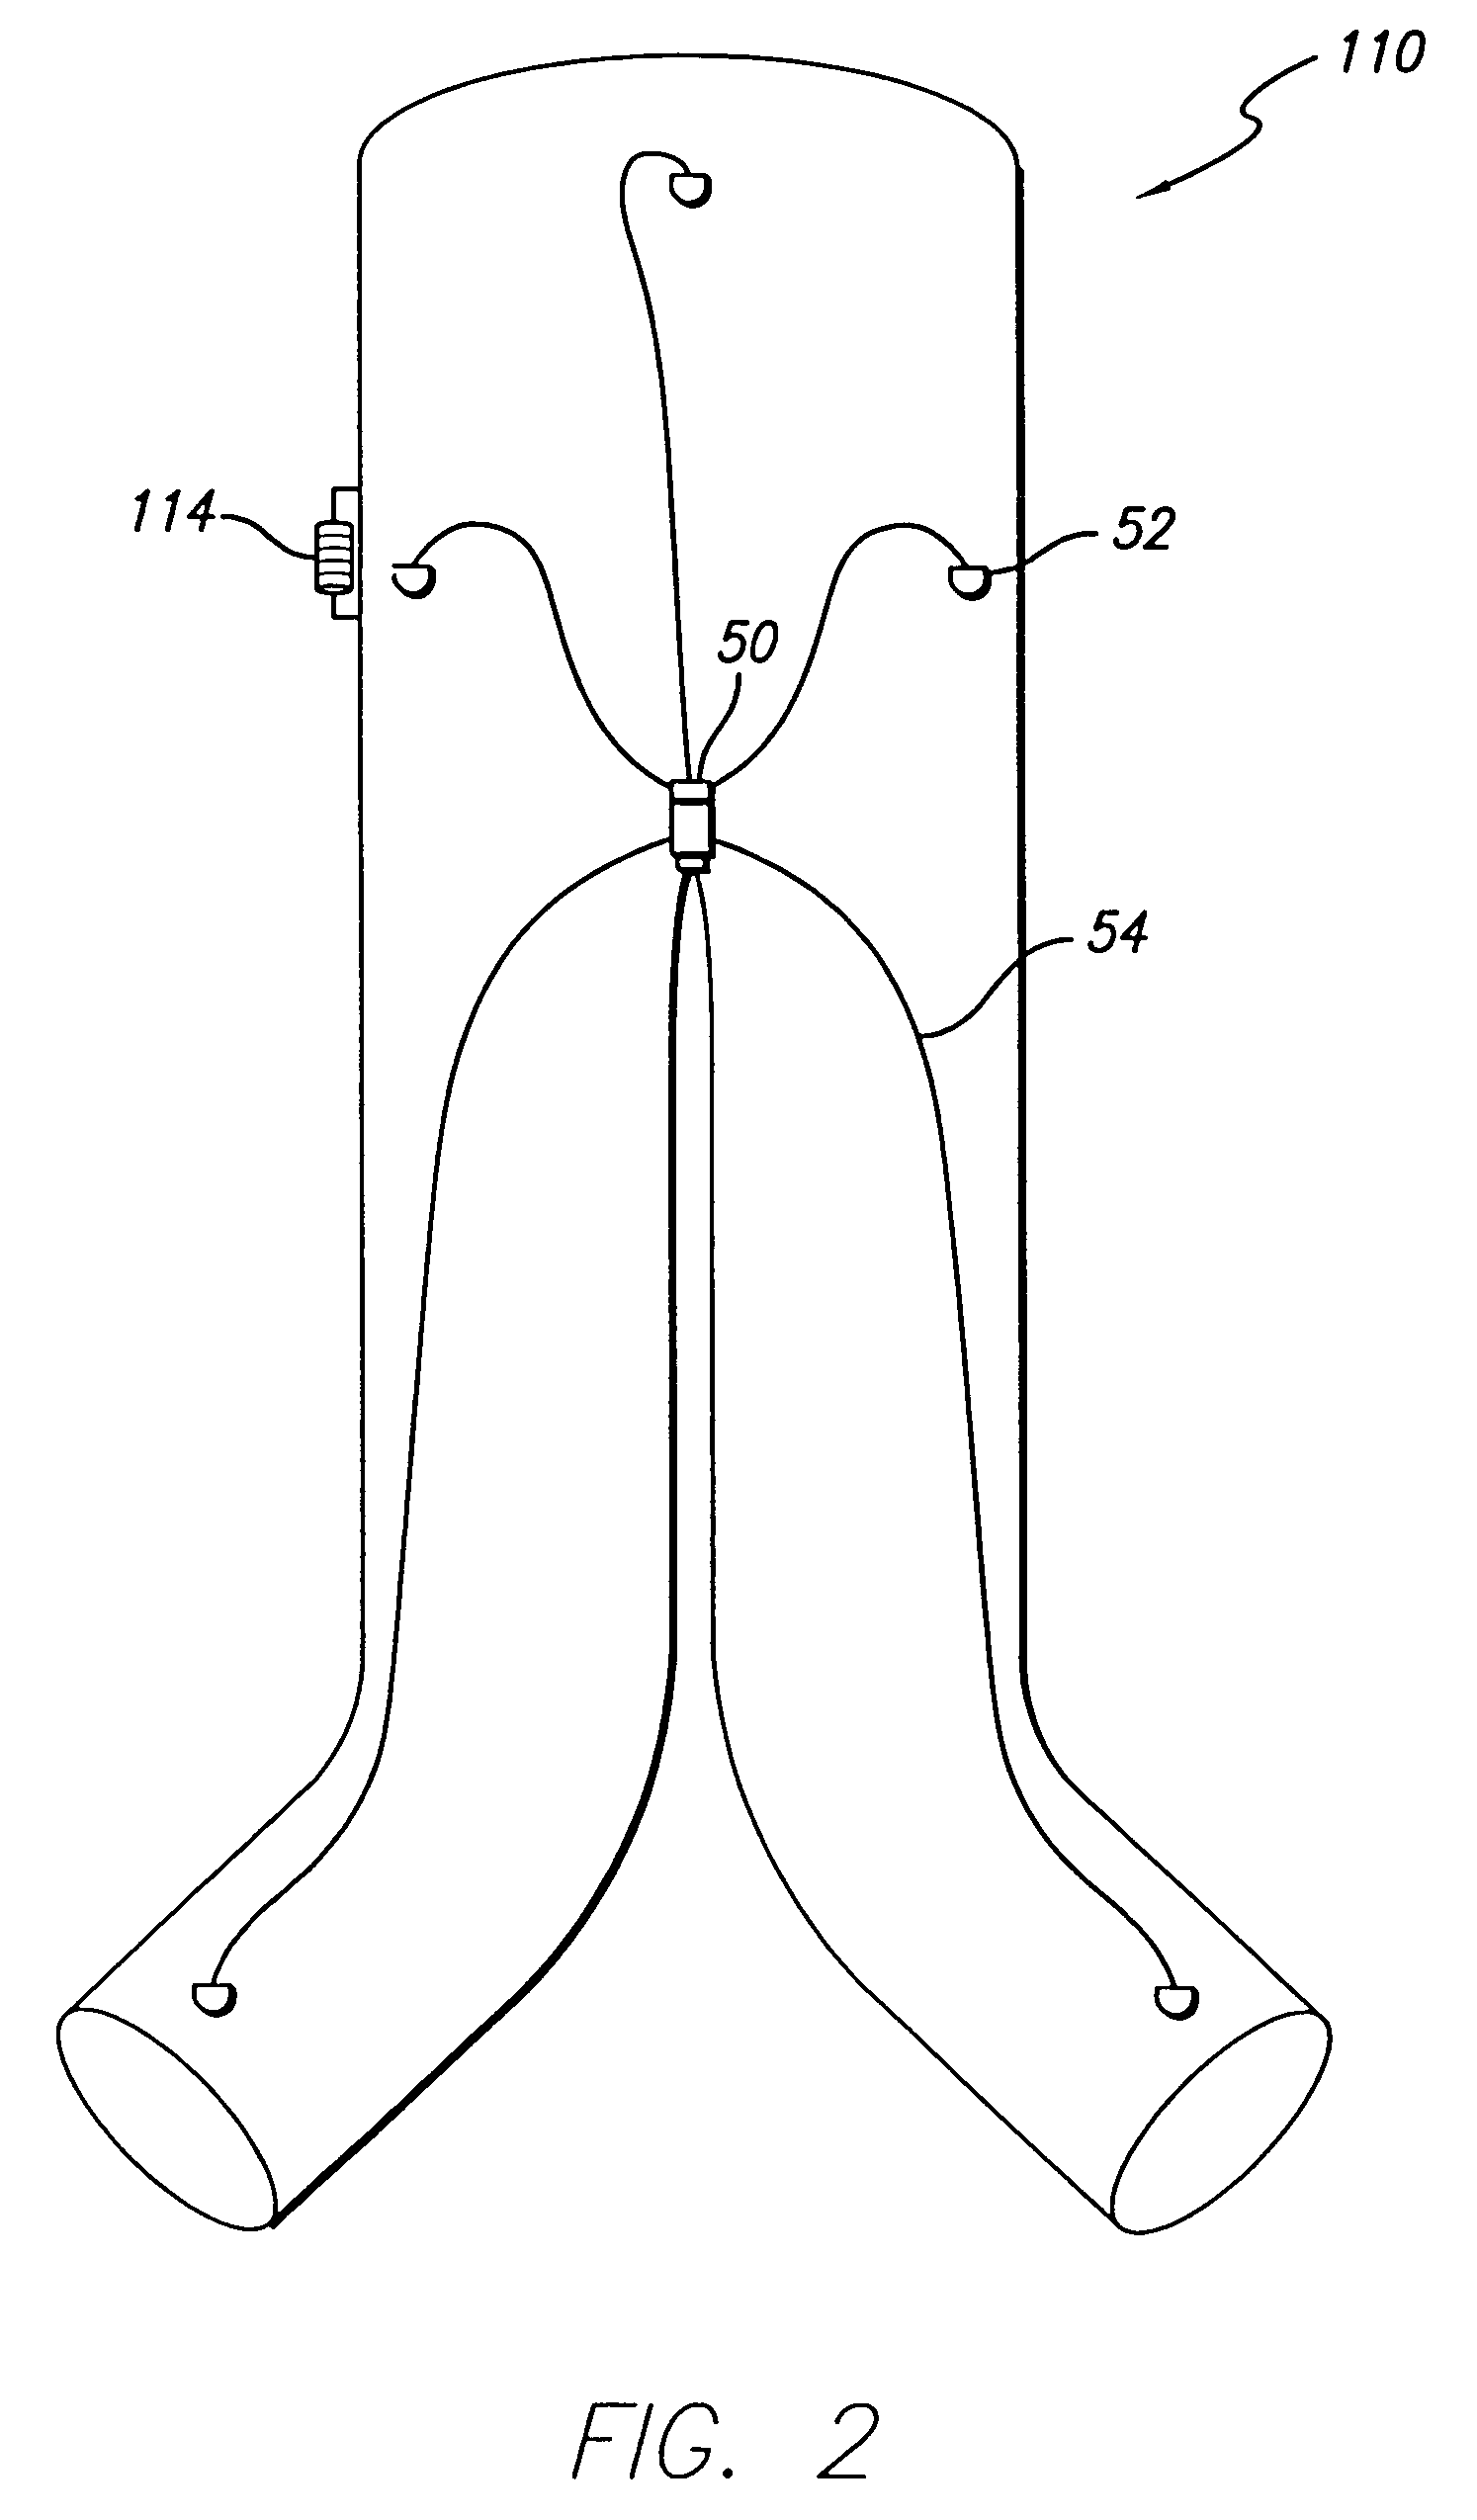 Endovascular graft with pressor and attachment methods